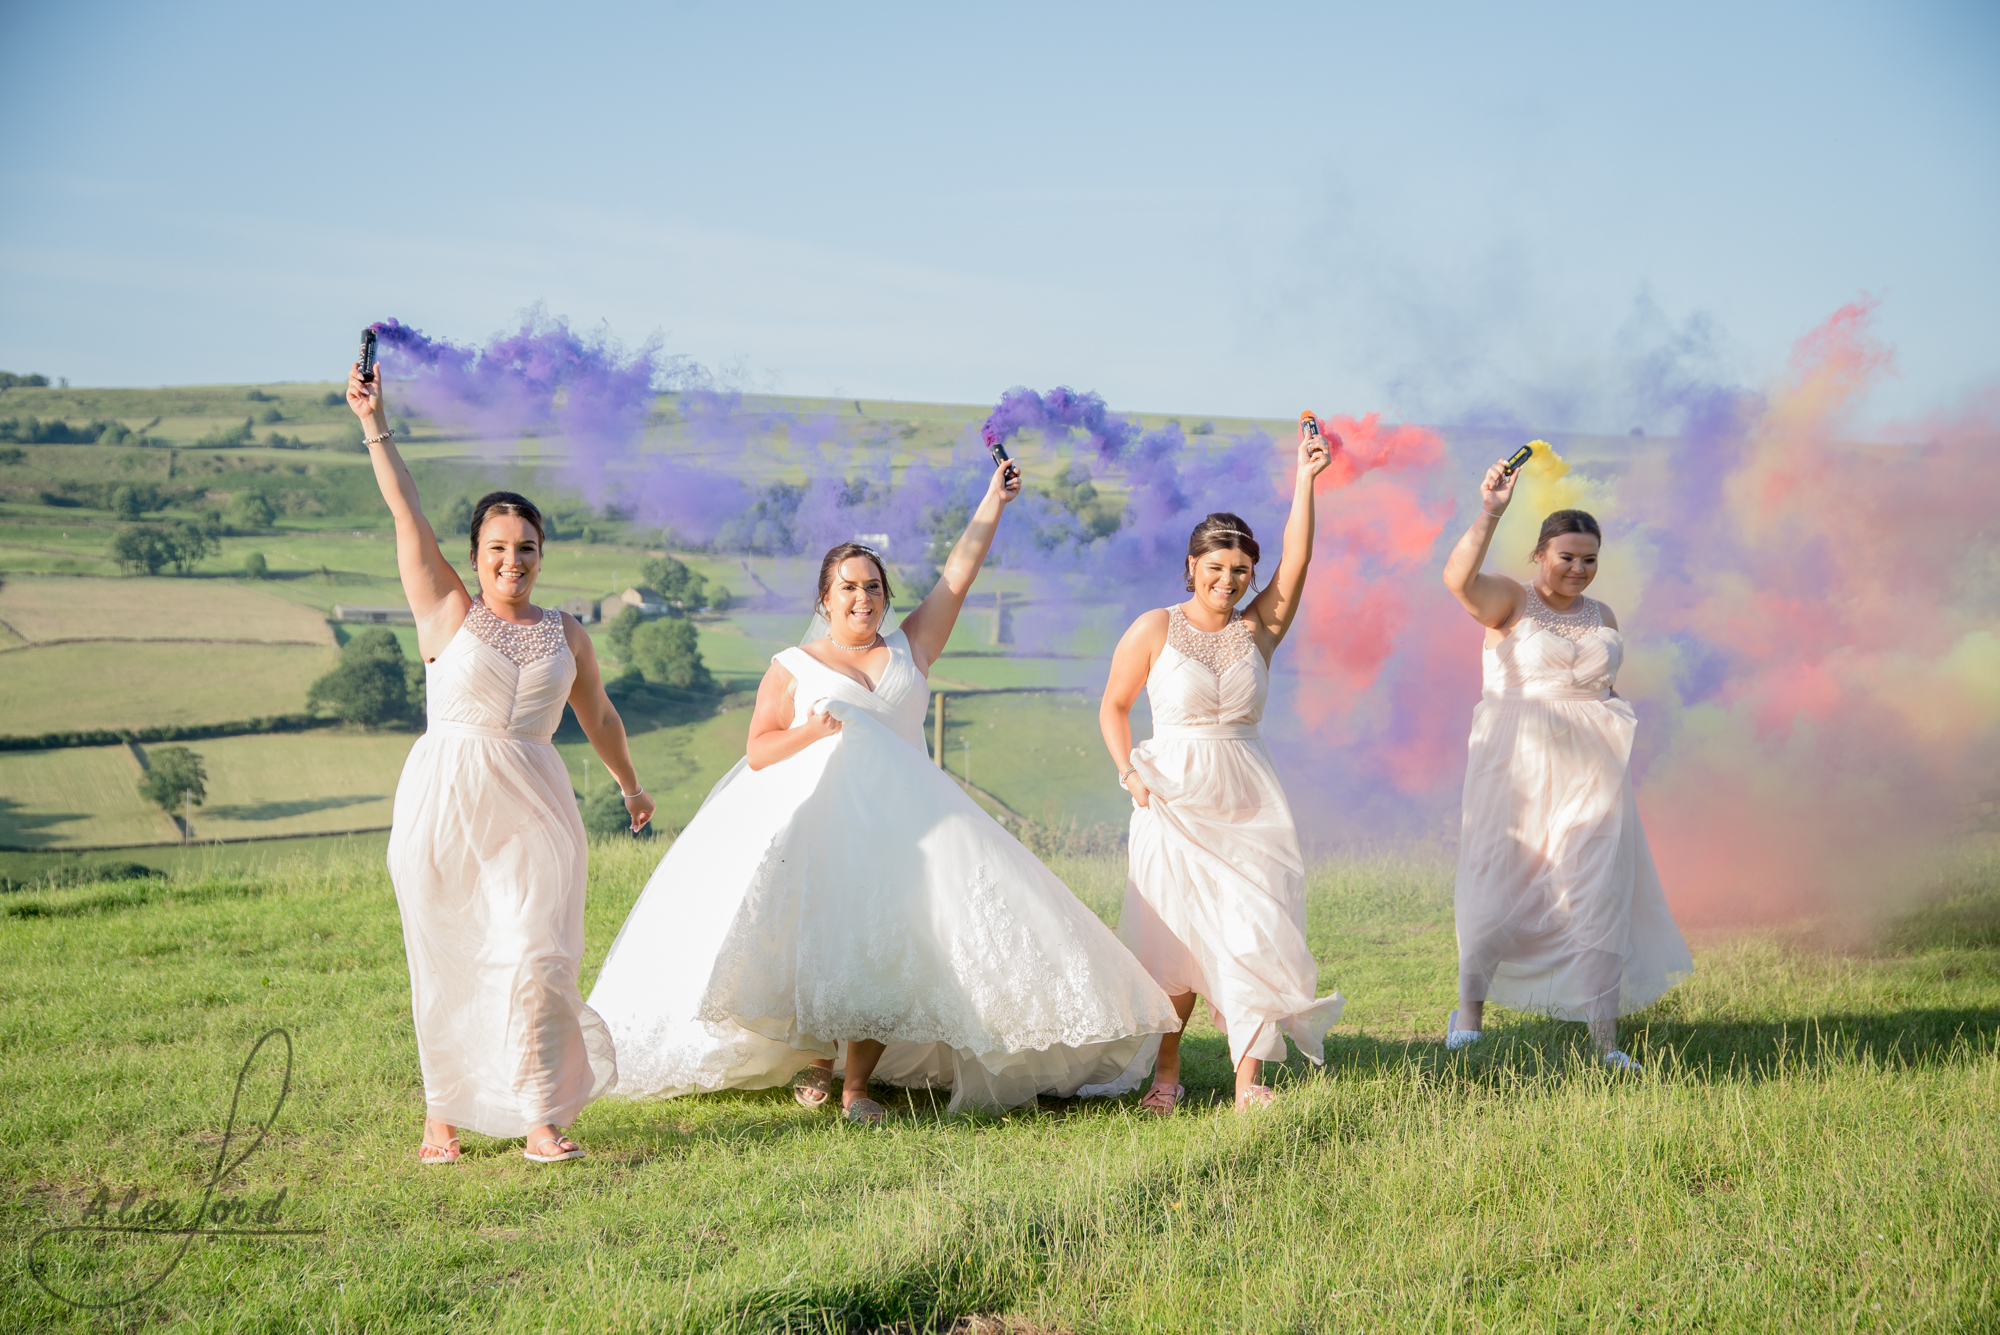 Bride and bridesmaids run wit smoke bombs in a field with the Yorkshire countryside in the background